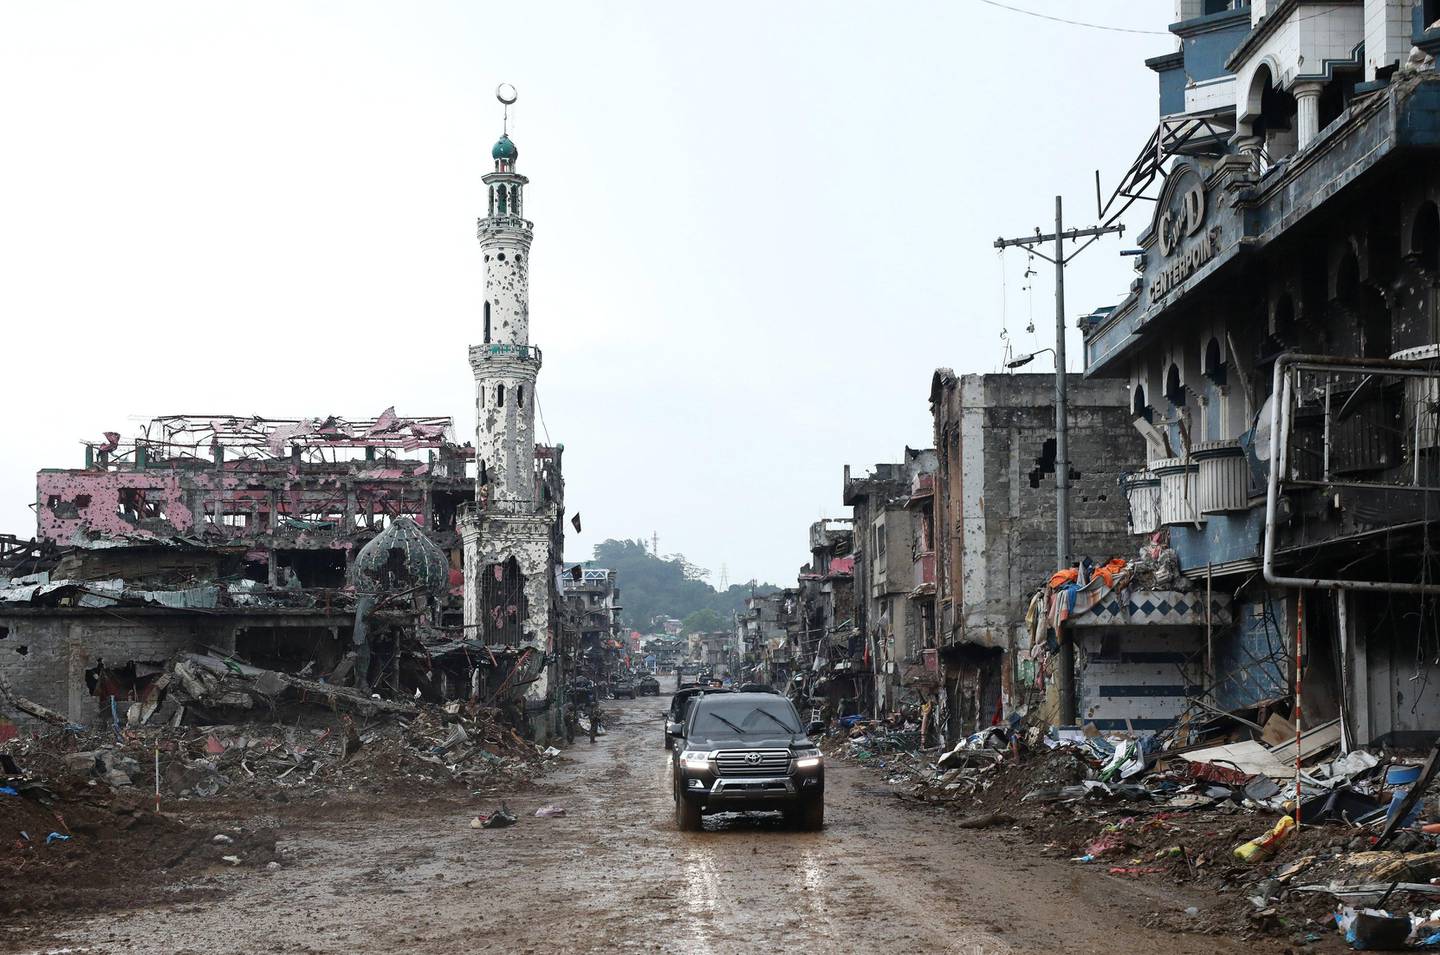 epa06240538 A handout photo made available by the Presidential Photographers Division (PPD) on 02 October 2017 shows a convoy of Philippine President Rodrigo Duterte maneuvering next to damaged mosque and buildings in Marawi city, southern Philippines. According to news reports, Philippine President Rodrigo Duterte made a visit in the conflict-torn Marawi City where government troops are still fighting Islamic State-inspired extremists.  EPA/ROBINSON NINAL JUNIOR / PPD HANDOUT  HANDOUT EDITORIAL USE ONLY/NO SALES